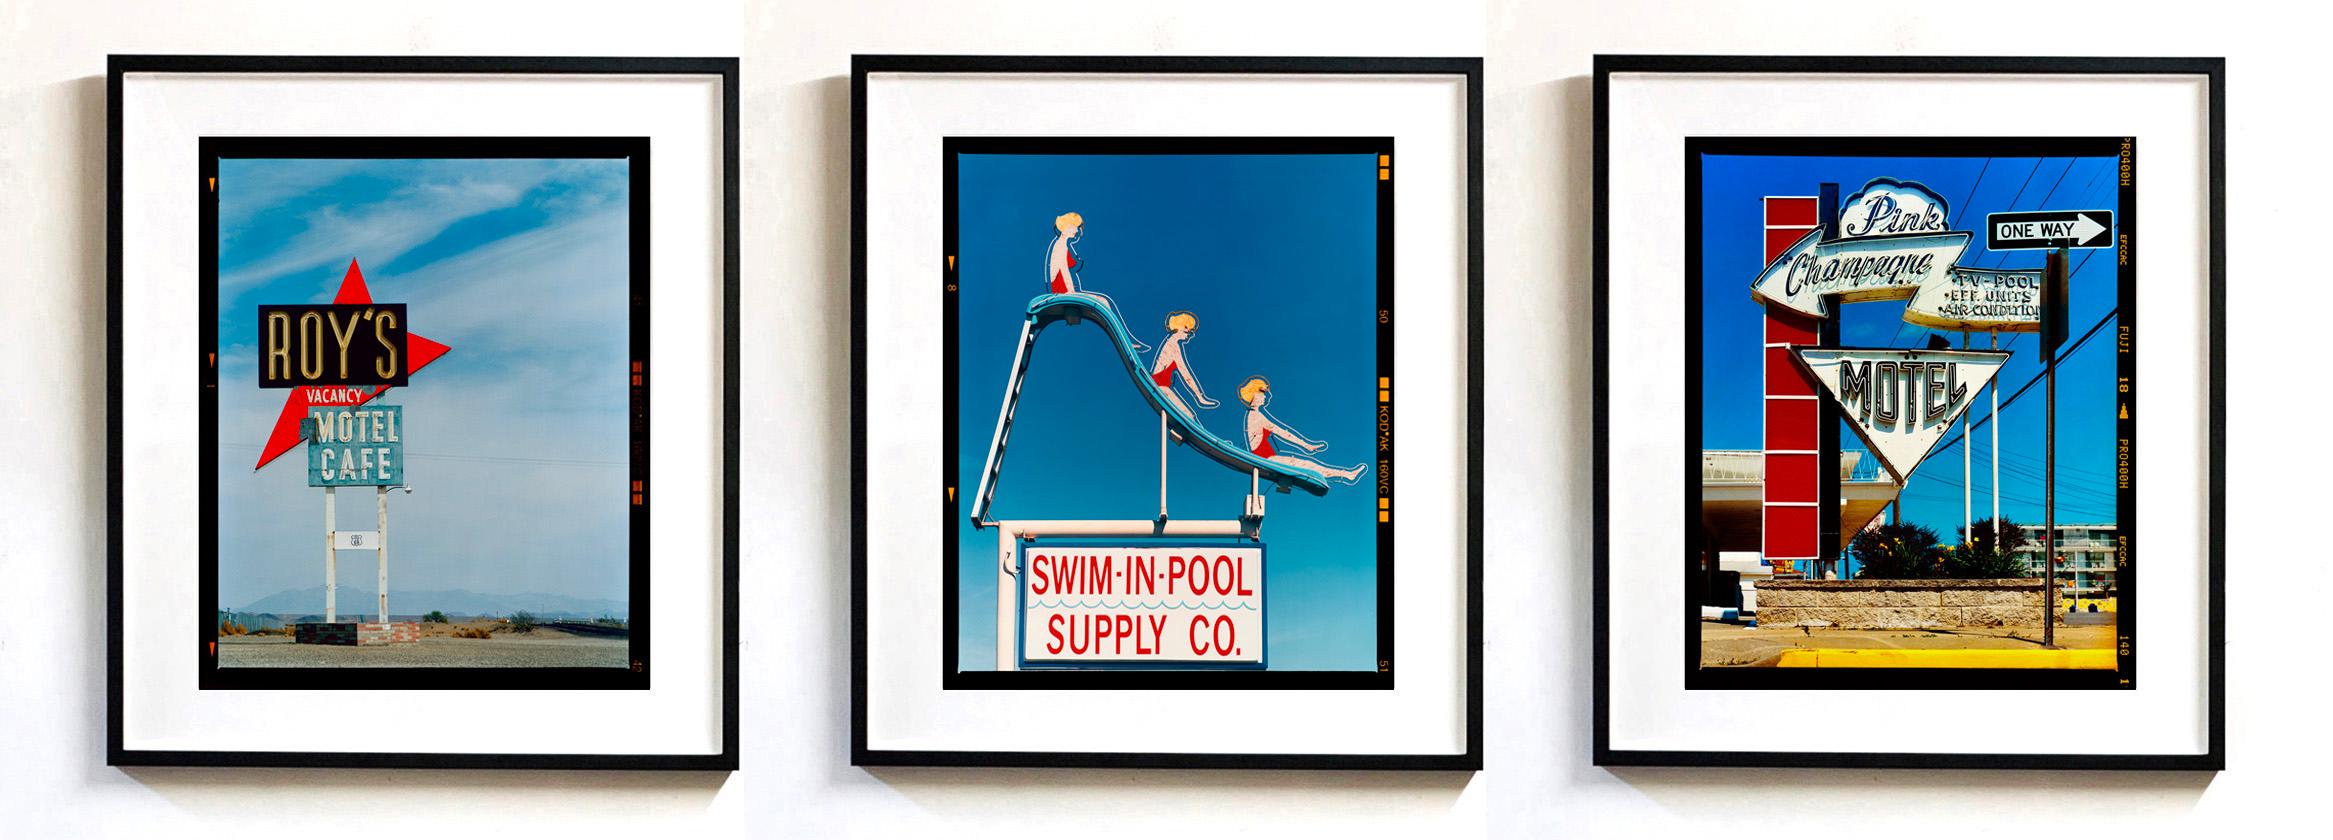 Swim-in-Pool Supply Co. Las Vegas - American Color Sign Photography  For Sale 3